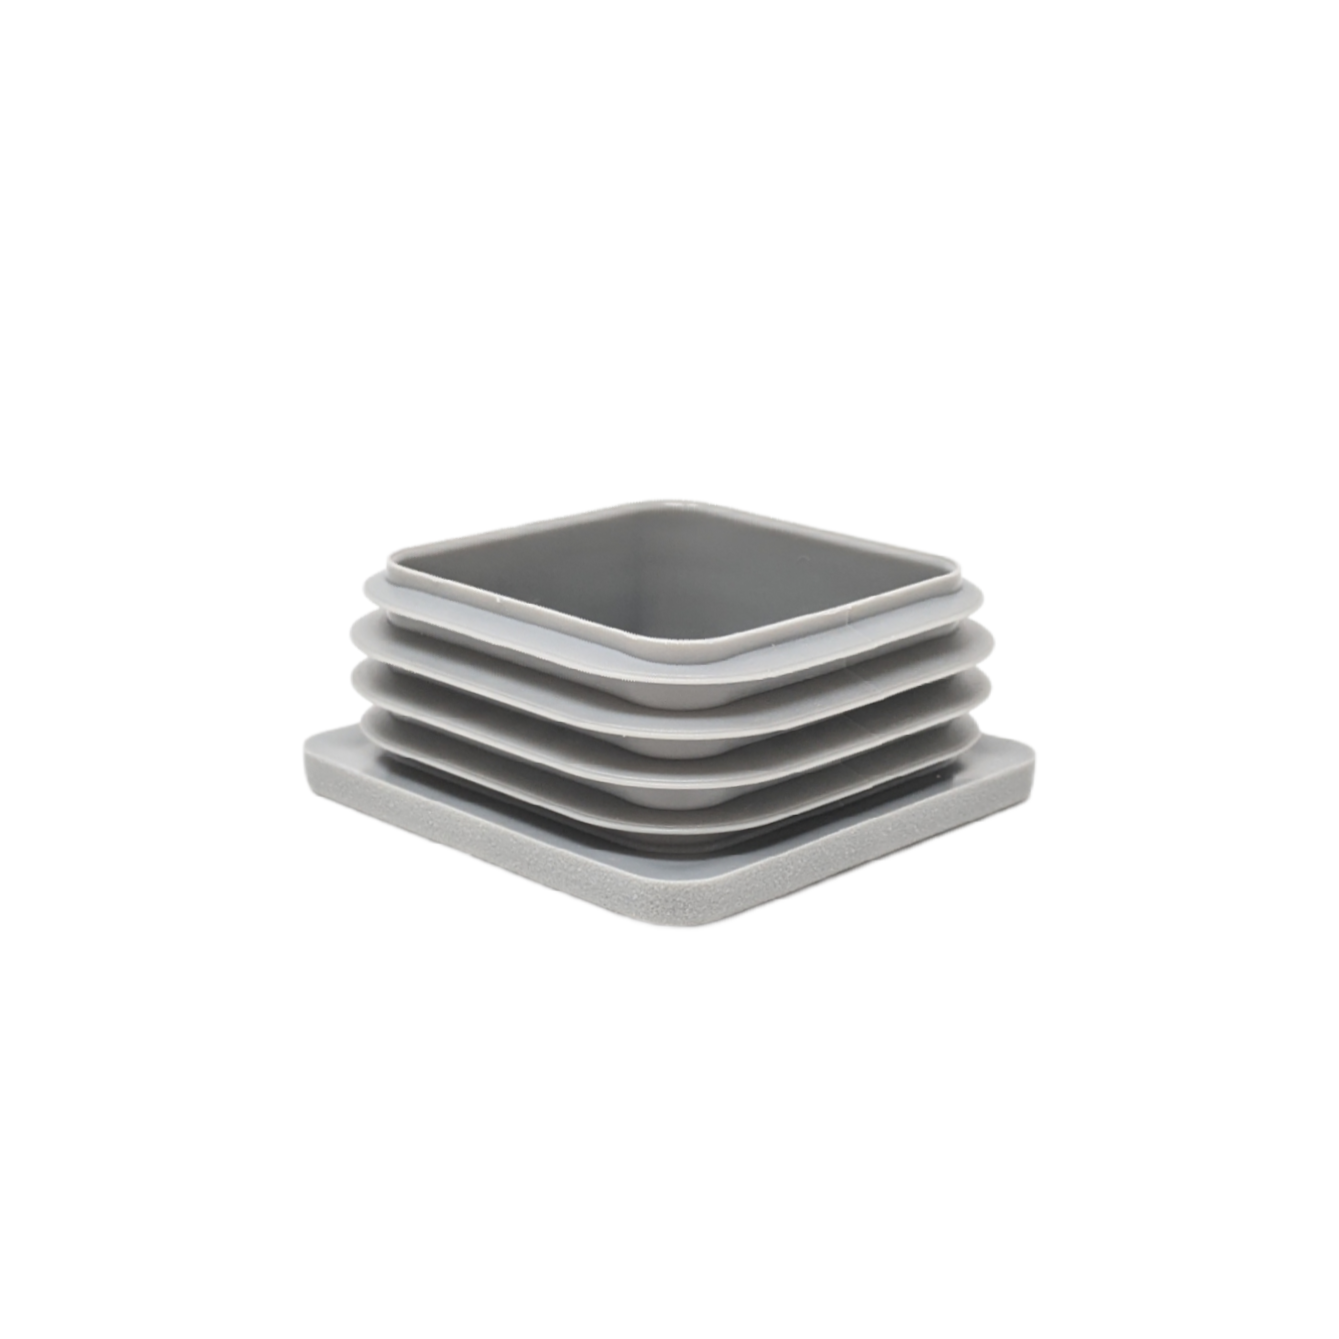 Square Tube Inserts 60mm x 60mm Grey | Made in Germany | Keay Vital Parts - Keay Vital Parts